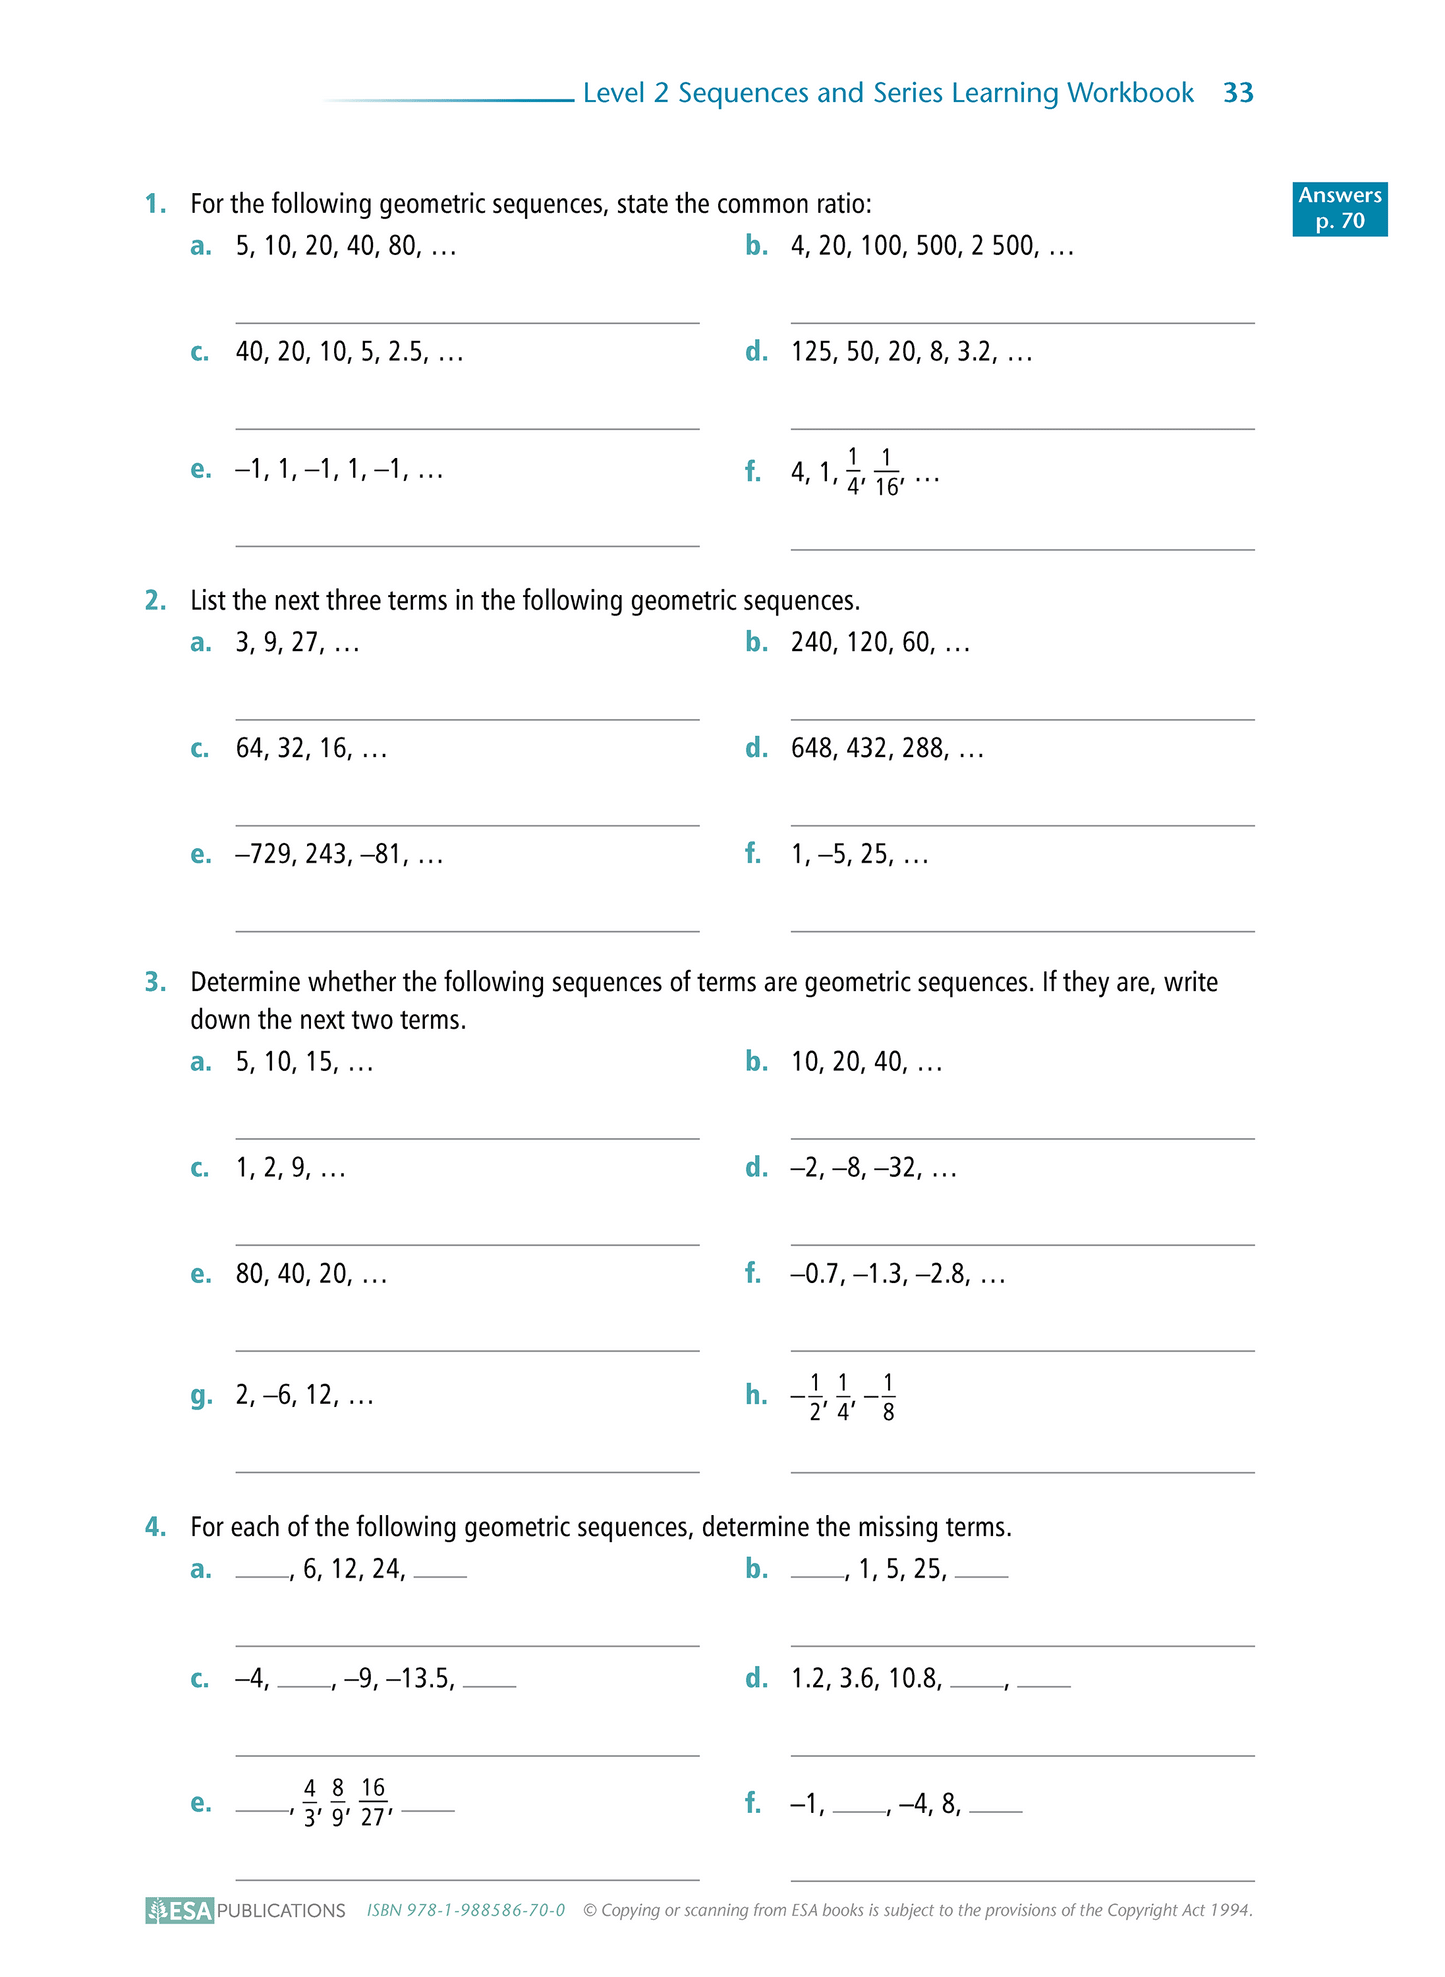 Level 2 Sequences and Series 2.3 Learning Workbook - SPECIAL (damaged stock at $5 each)